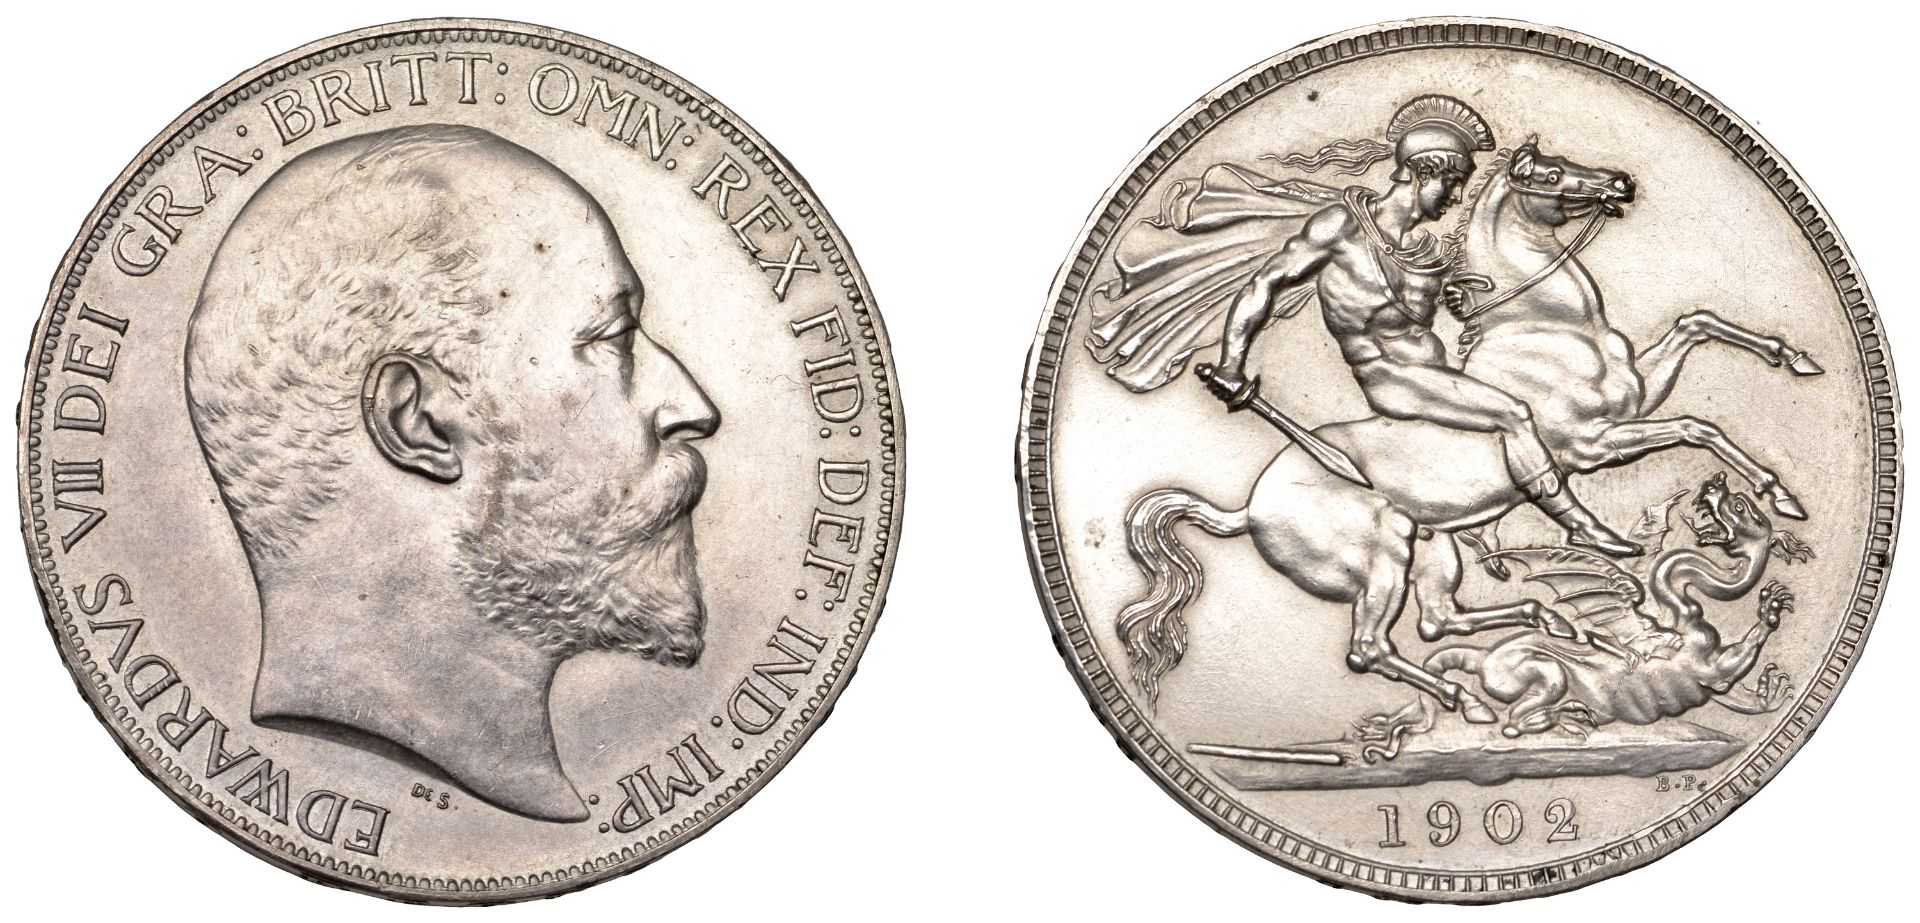 Edward VII (1901-1910), Proof Crown, 1902 (ESC 362; S 3979). Fields brushed, otherwise good...